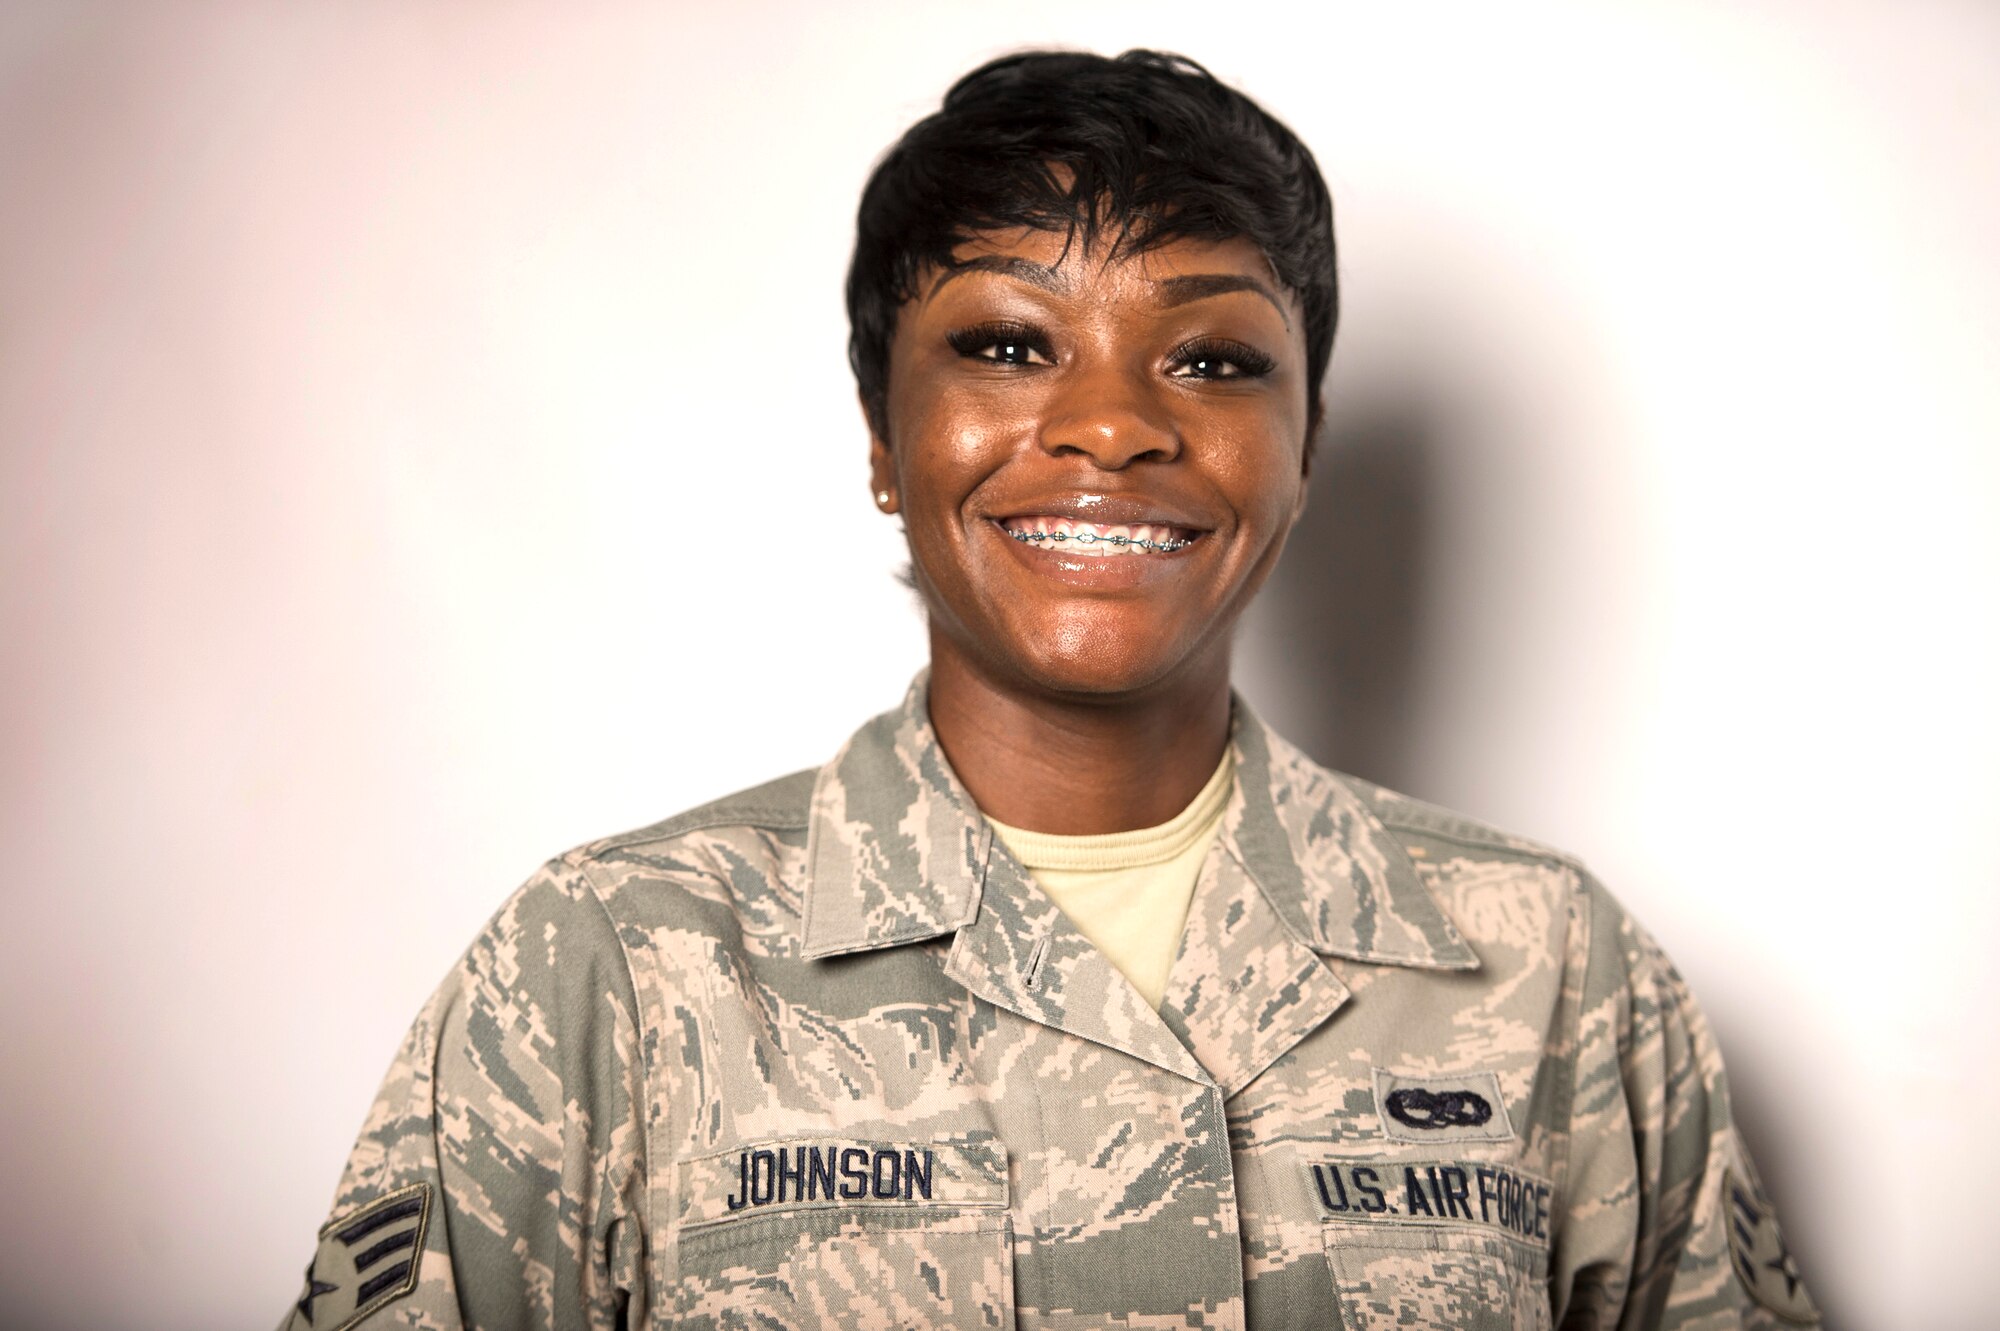 U.S. Air Force Senior Airman Kyara Johnson, 94th Aircraft Maintenance Unit weapons loader, is a member of the F-22 Raptor Demonstration Team, stationed at Langley Air Force Base, Va. Before joining the team, Johnson was responsible for loading bombs and missiles onto the Raptor, as well as, ensuring the weapon system remained up-to-date. (U.S. Air Force photo by Senior Airman Kayla Newman/Released)